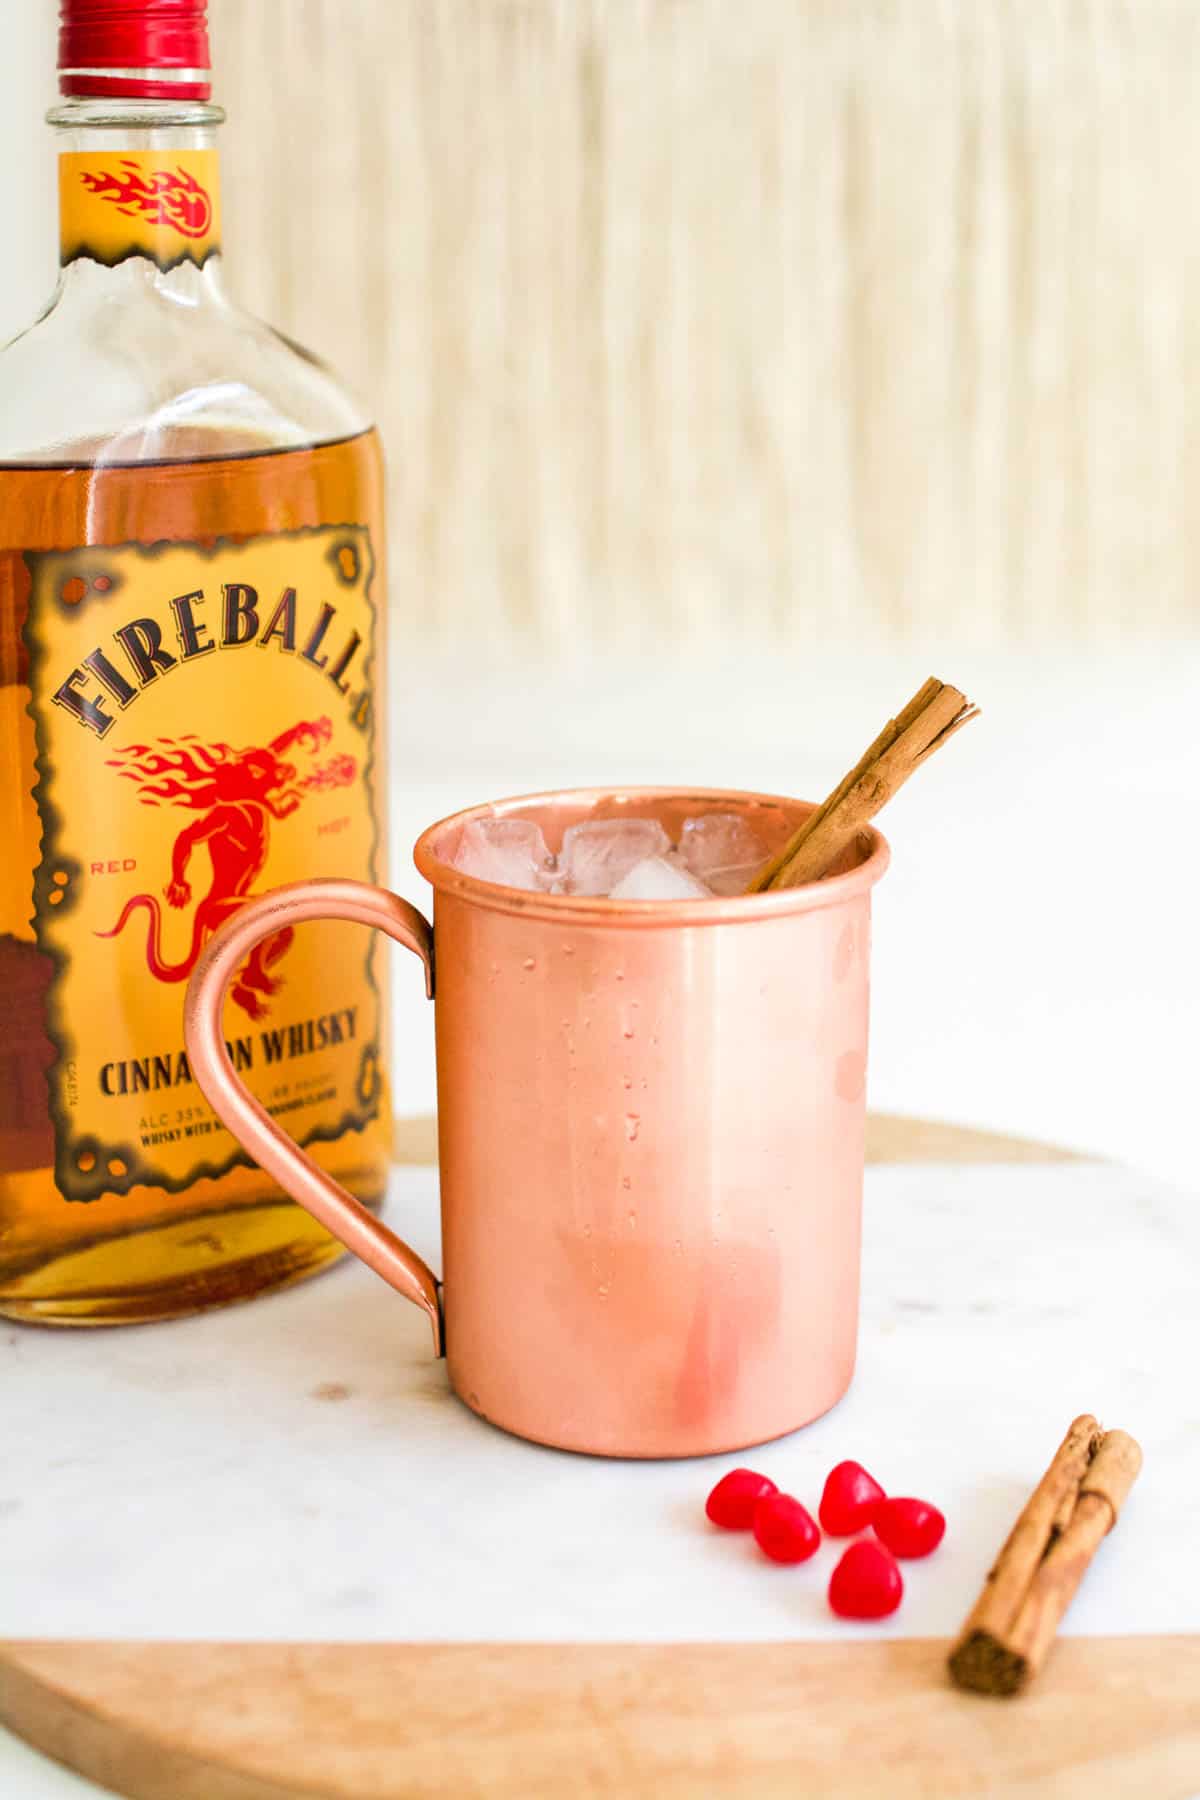 https://www.cupcakesandcutlery.com/wp-content/uploads/2020/12/moscow-mule-with-cinnamon-whisky.jpg